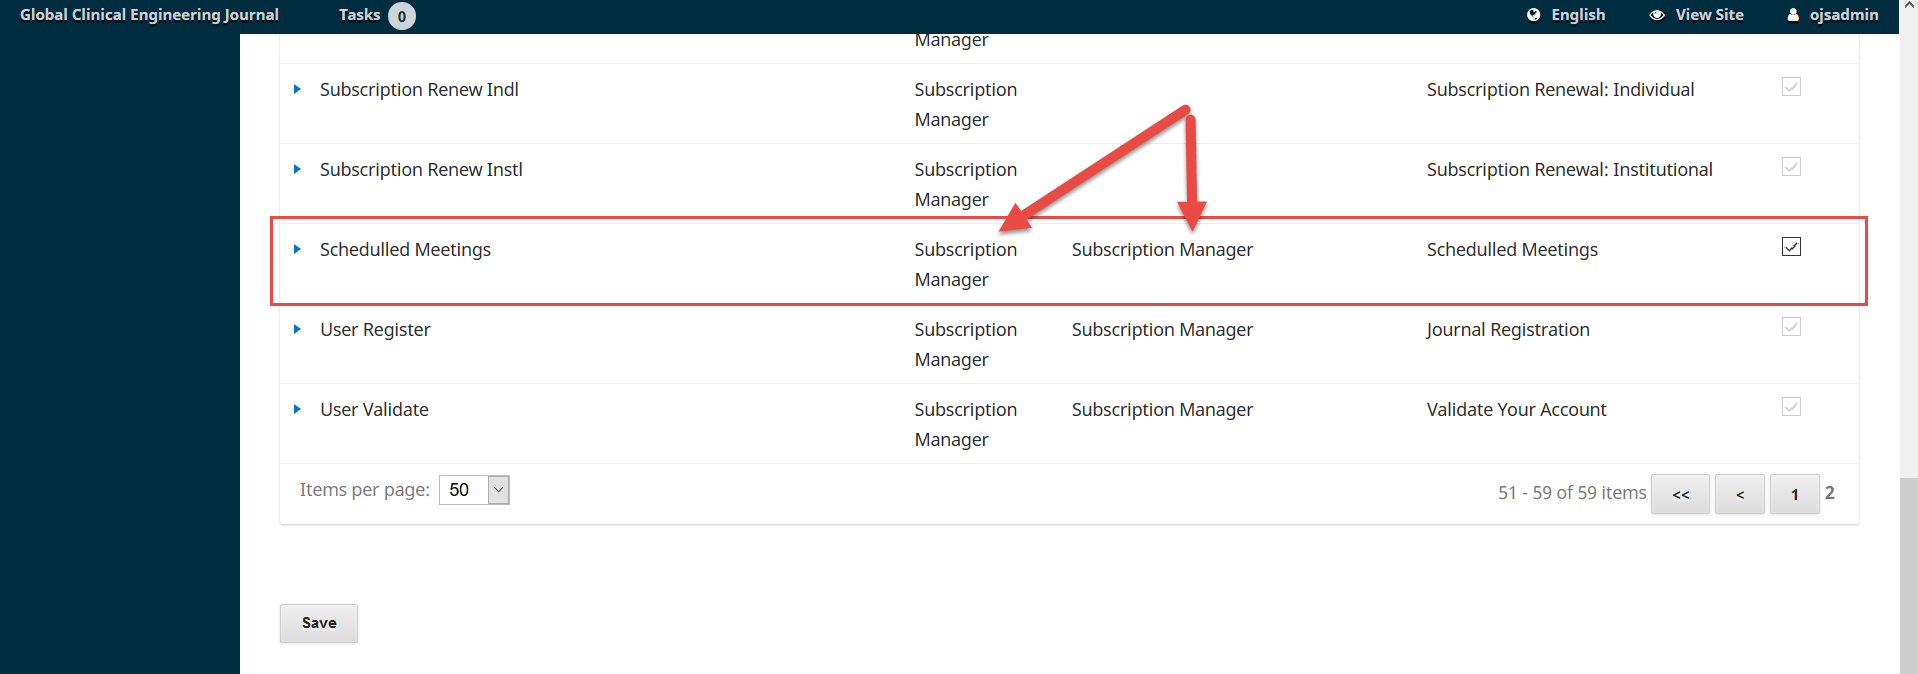 Subscription_Manager